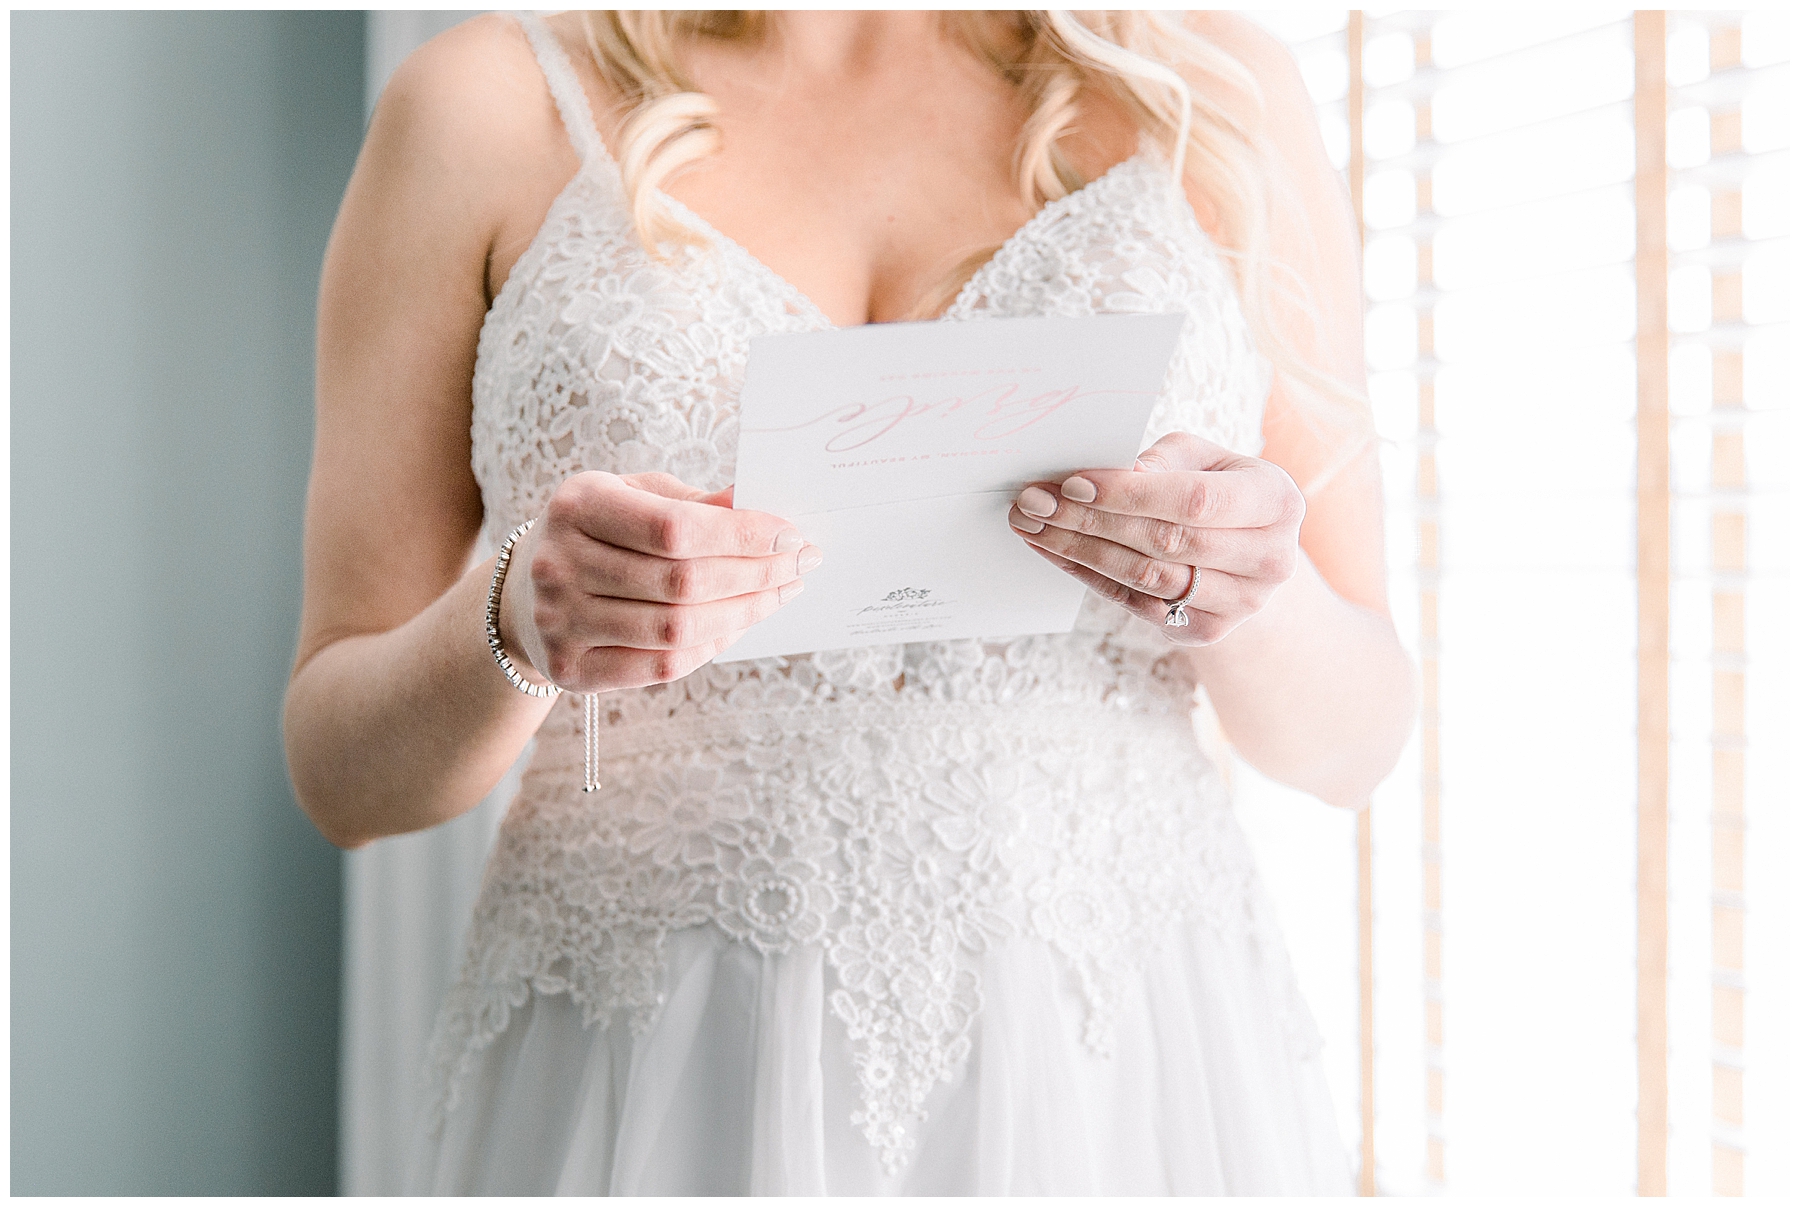 Bride reads letter before wedding ceremony